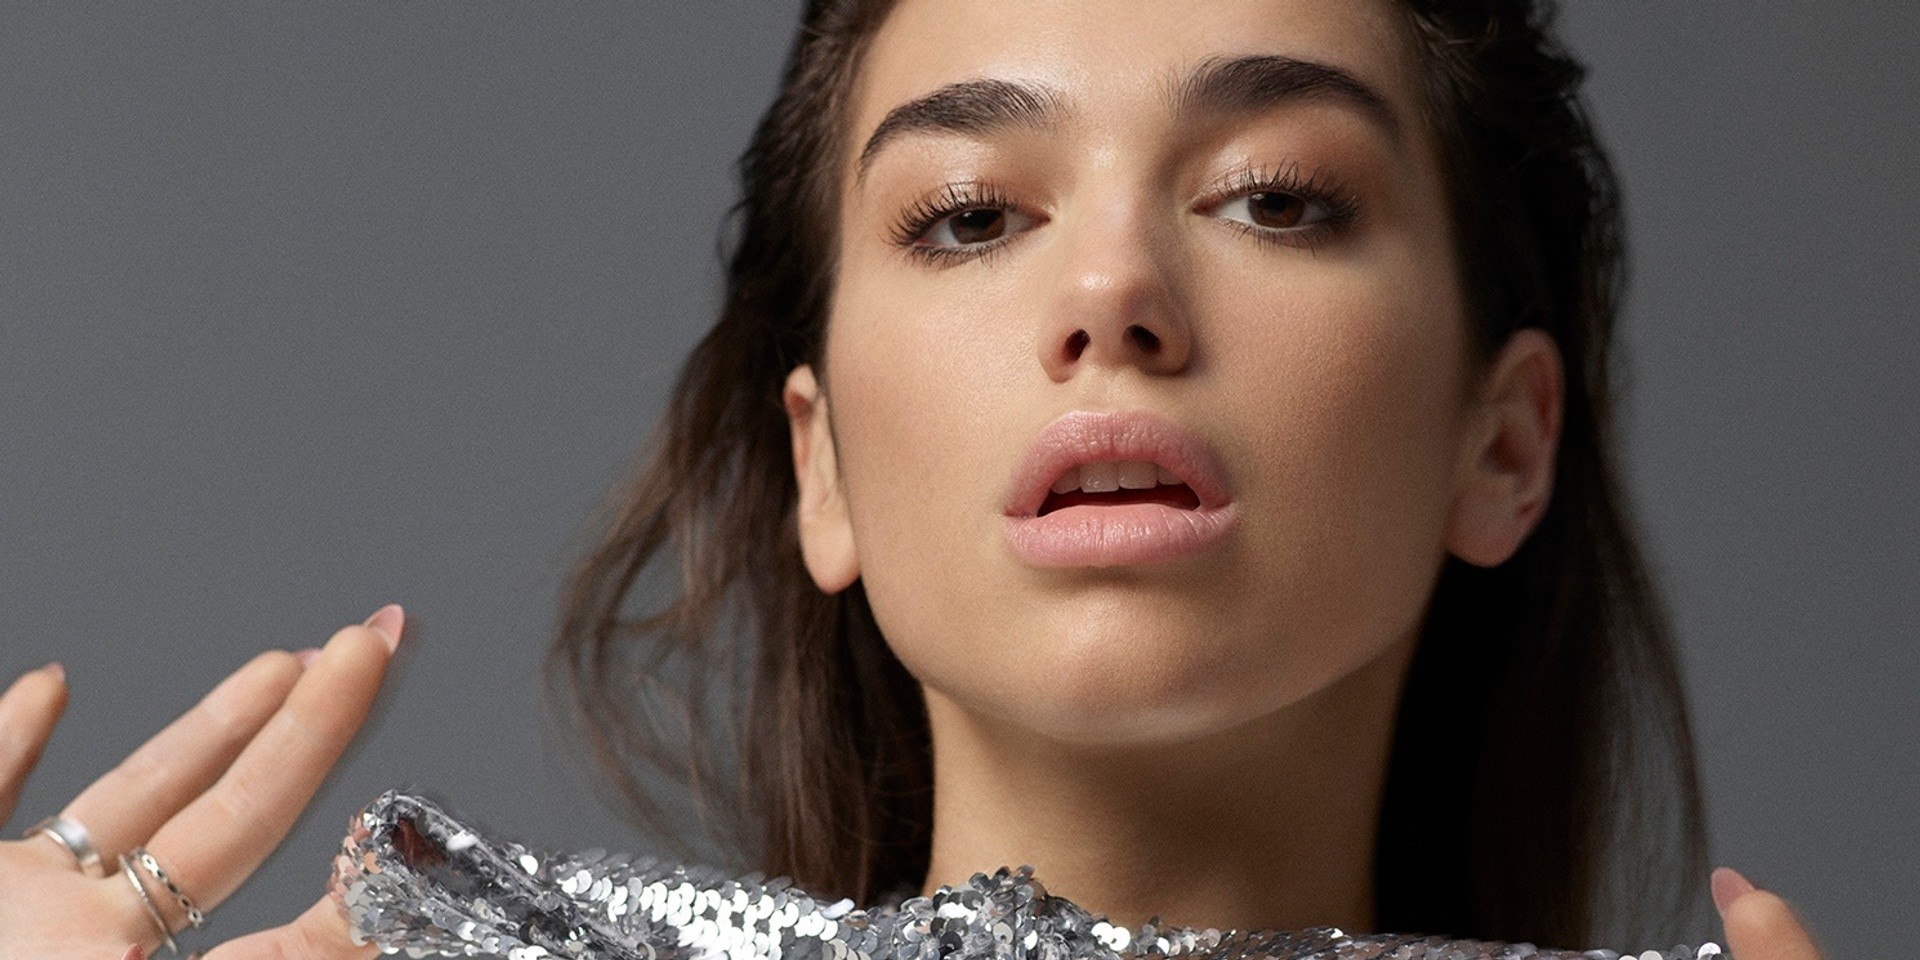 BREAKING: Dua Lipa will return to Singapore in May for a full concert